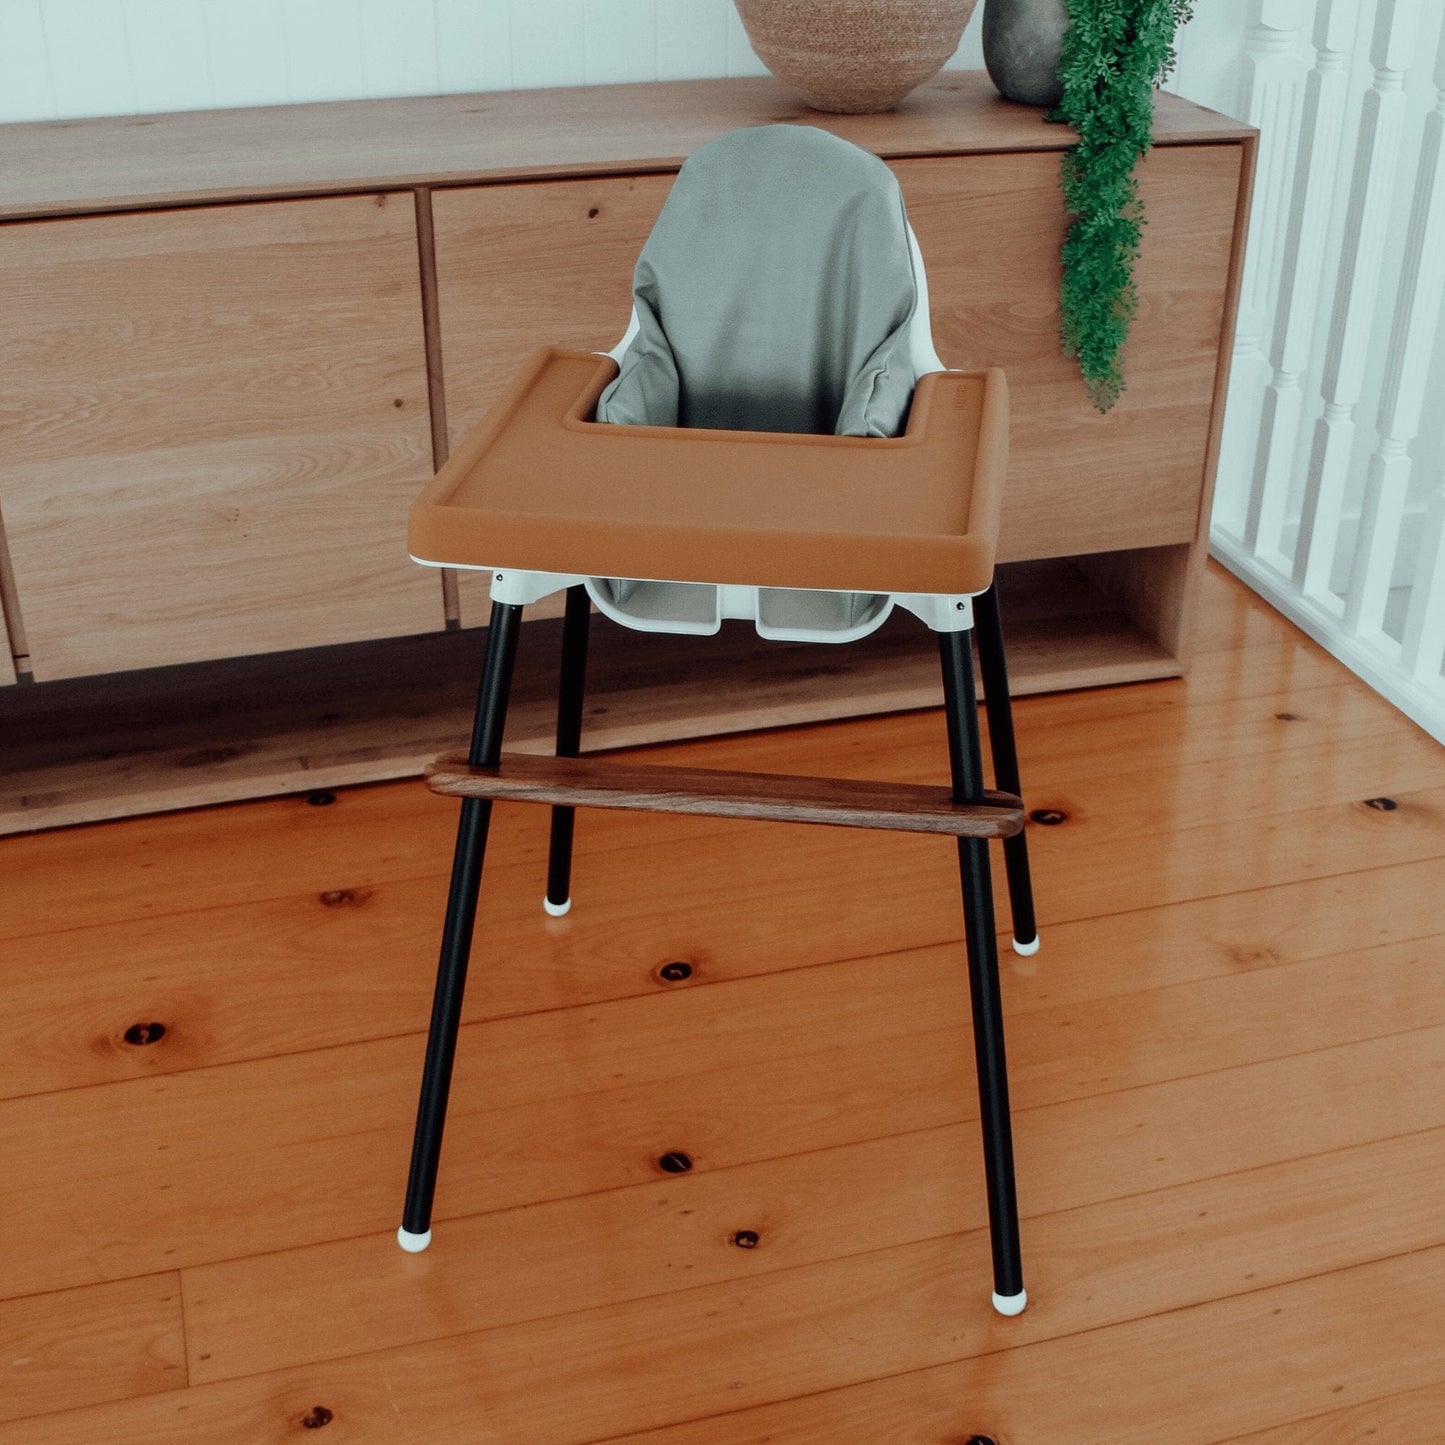 Load image into Gallery viewer, Walnut Highchair Footrest - Little Puku
